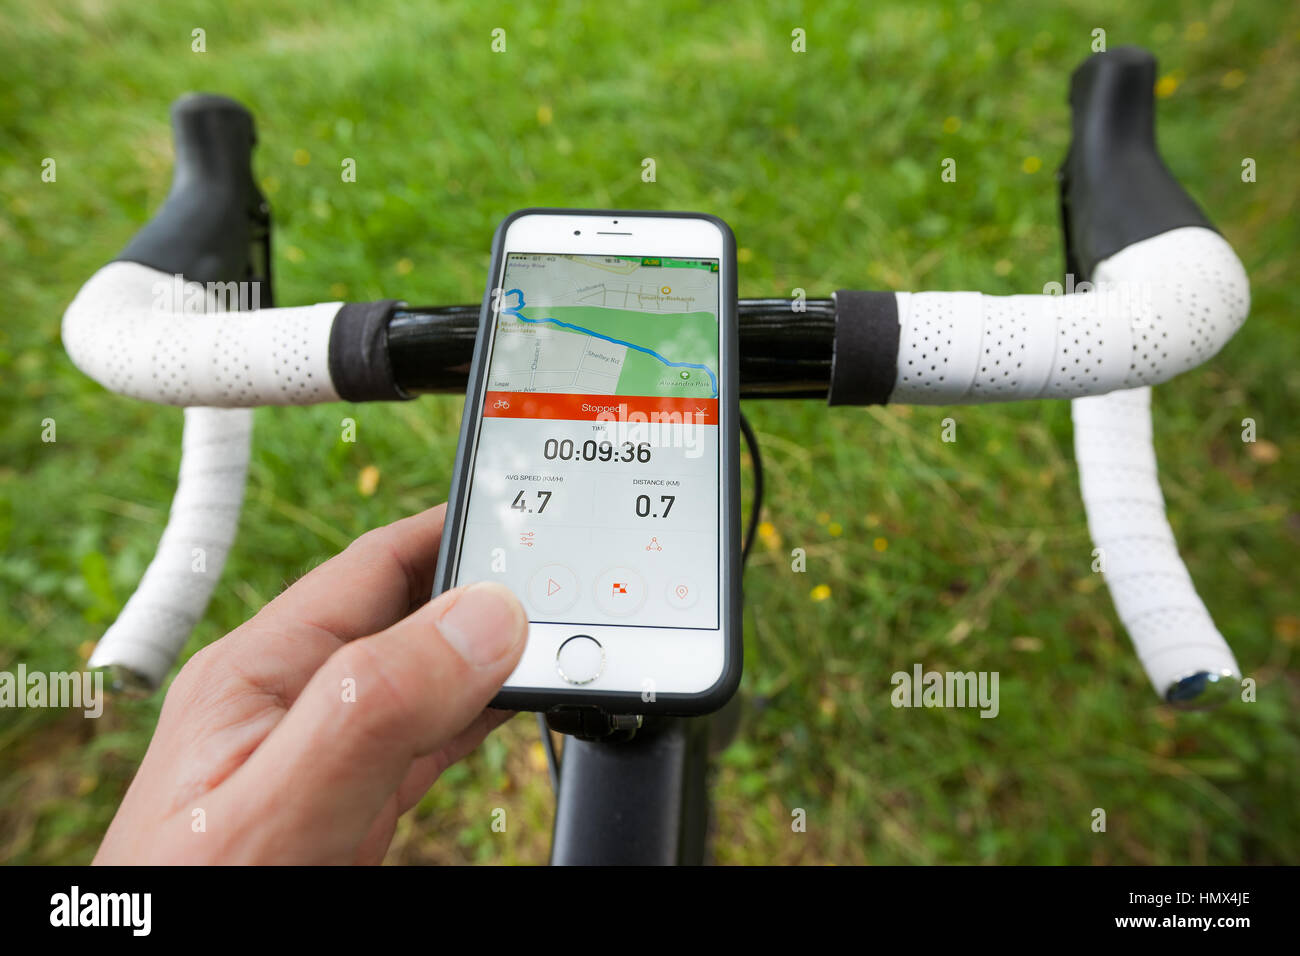 BATH, UK - SEPTEMBER 1, 2015 : Close-up of a smartphone mounted onto the handle bars of a road bike in a park. The phone is displaying the Strava app, Stock Photo